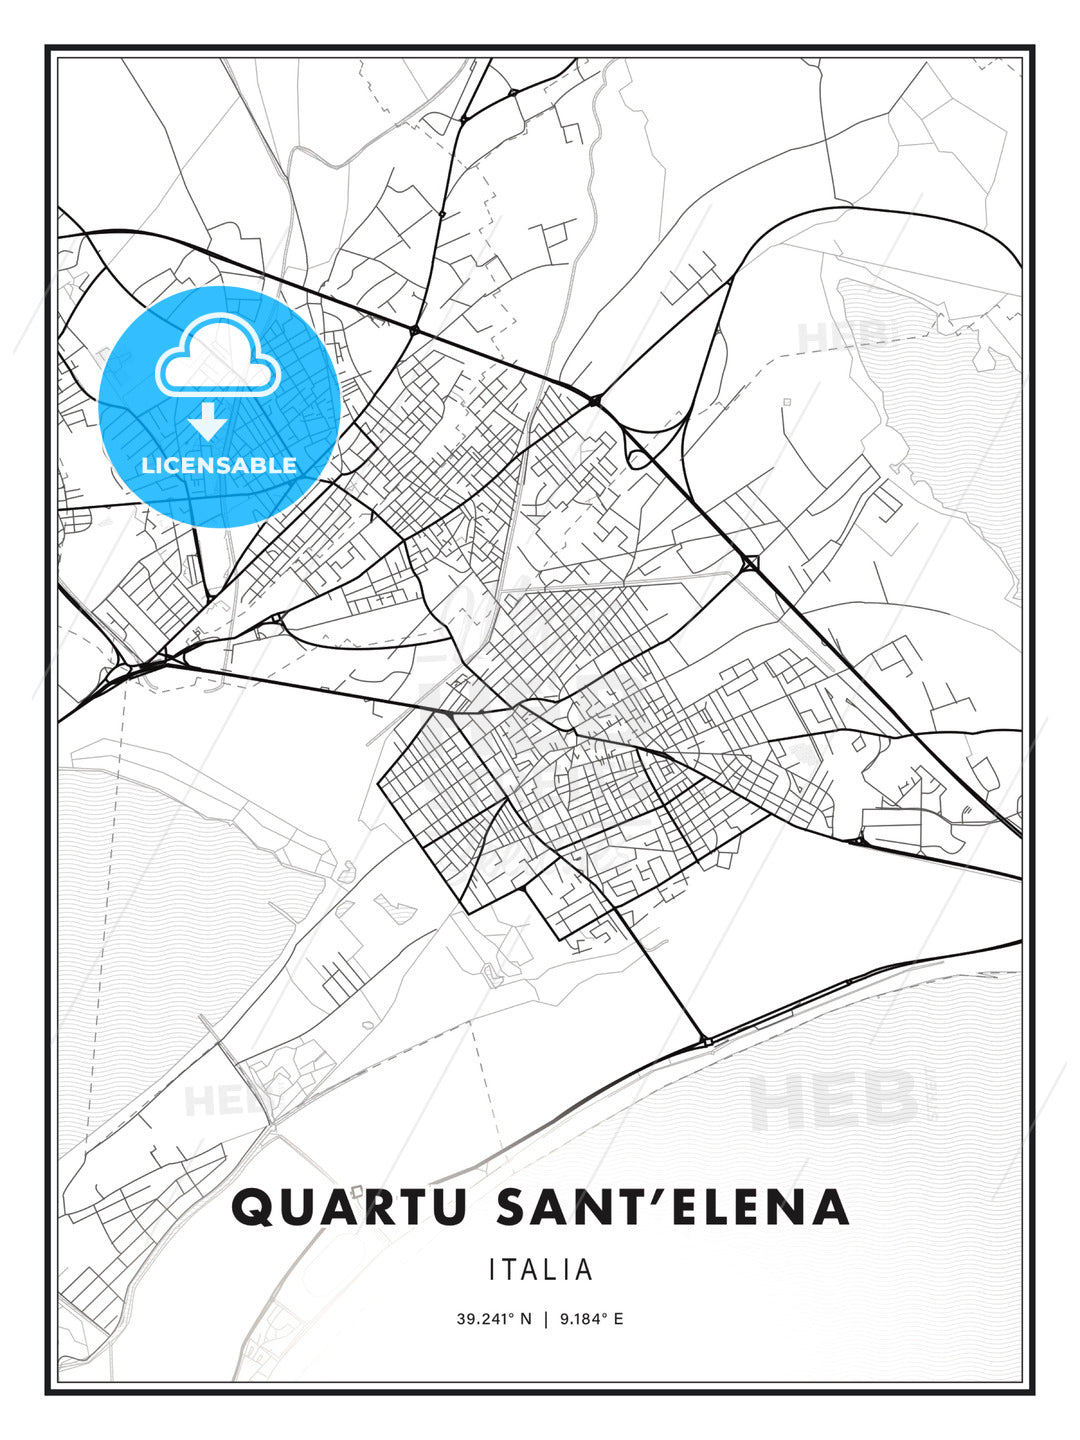 Quartu Sant Elena, Italy, Modern Print Template in Various Formats - HEBSTREITS Sketches